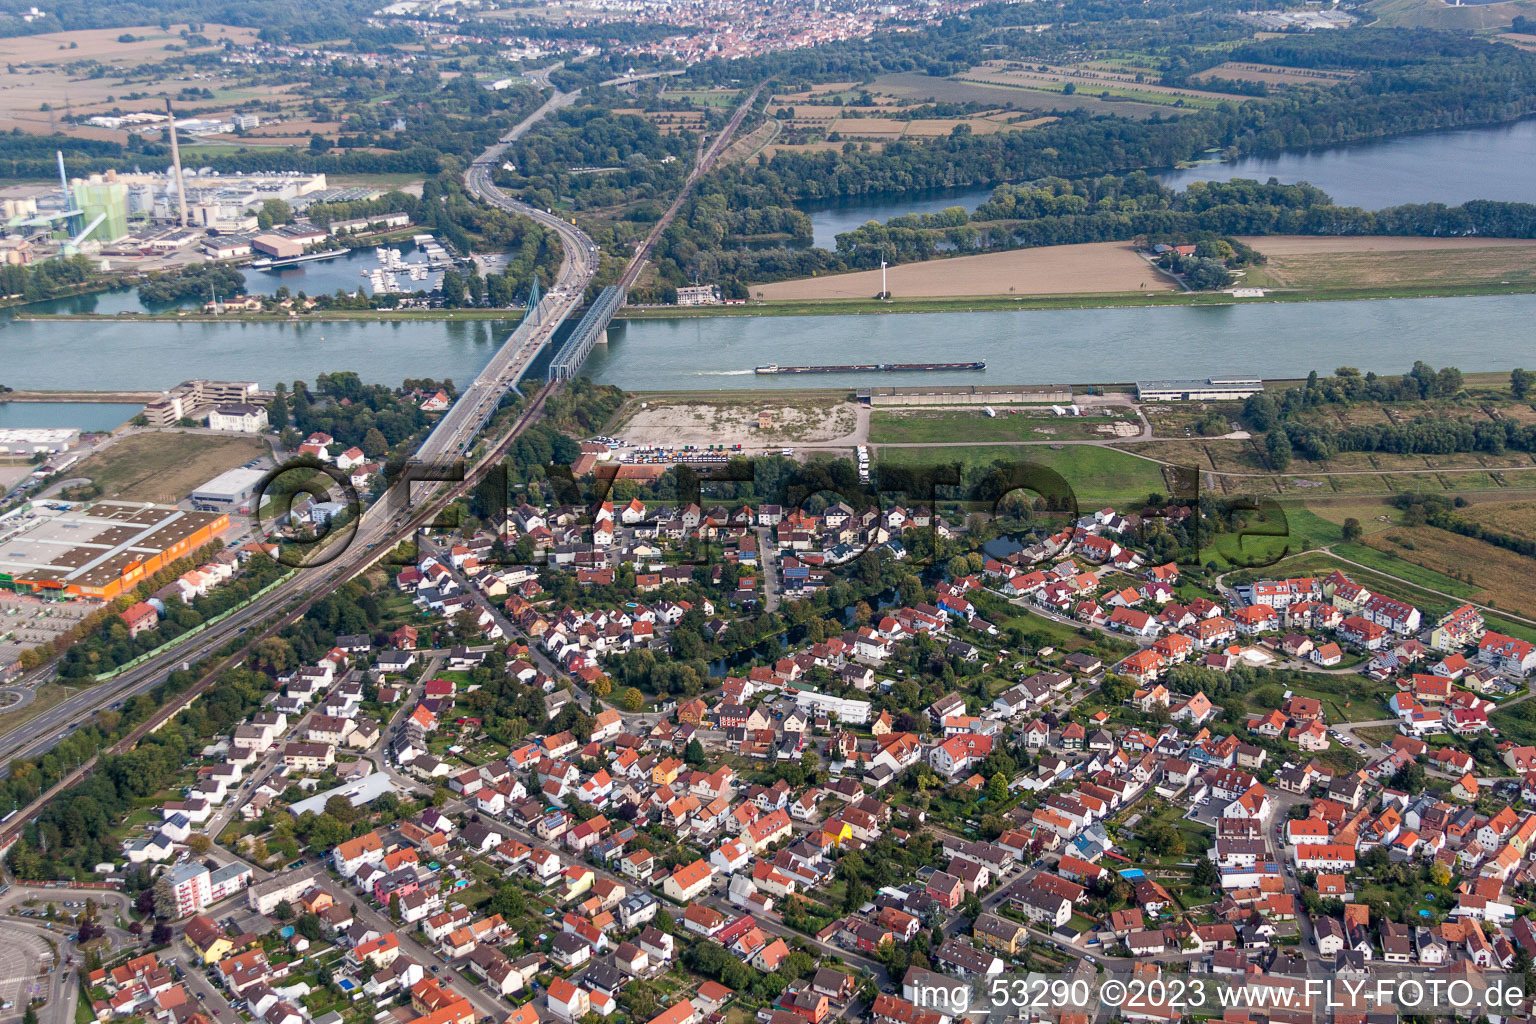 Rail and Street bridges construction across the Rhine river between Karlsruhe and Woerth am Rhein in the state Rhineland-Palatinate, Germany seen from above